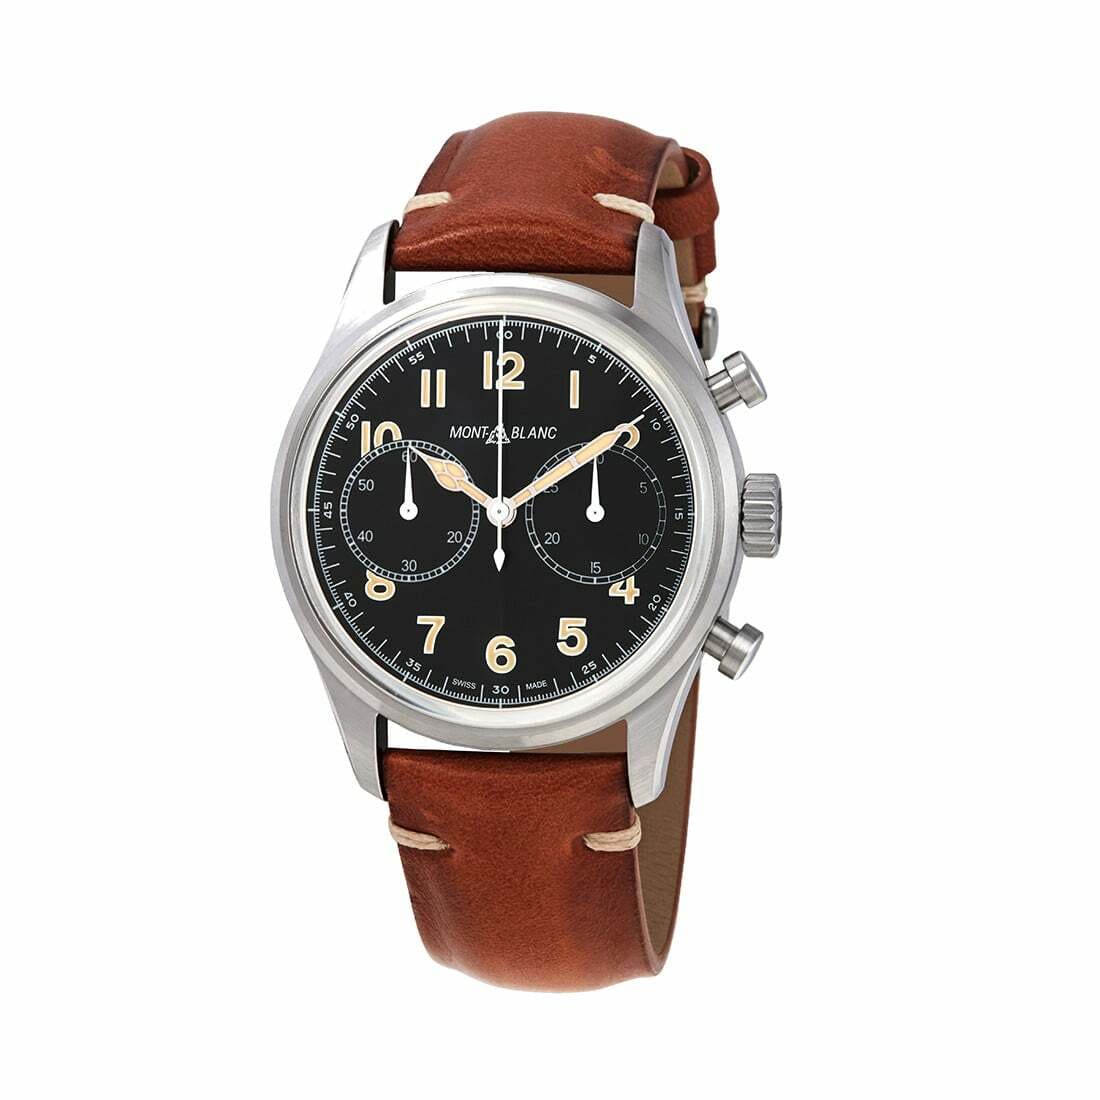 Montblanc 117836 Brown Leather Black Dial Men's Chronograph Automatic Watch 7612582315125